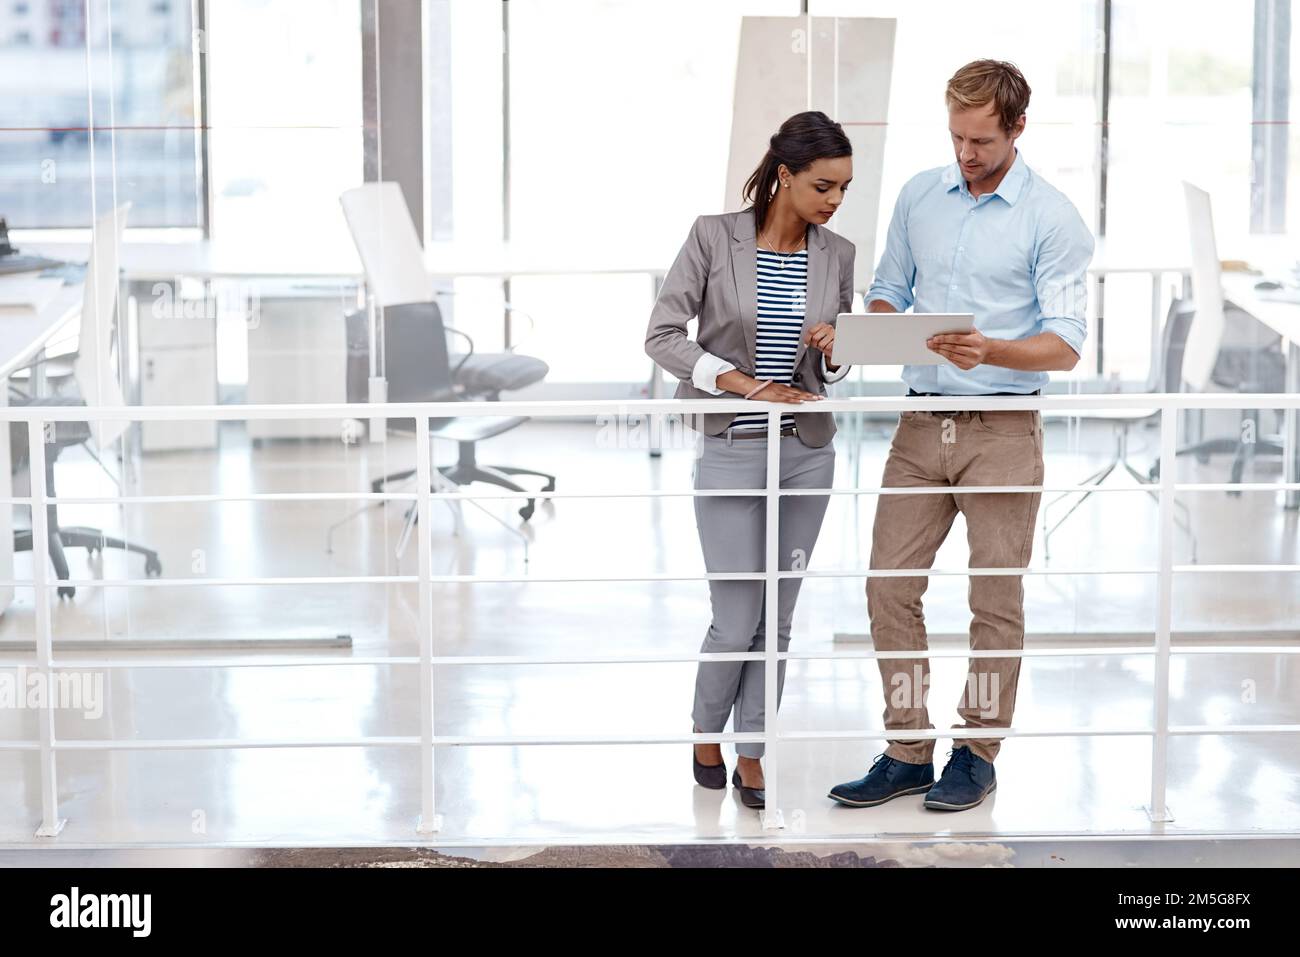 Maybe we need to change our approach. Full length shot of two good looking colleagues standing at work discussing ideas on a tablet in the office. Stock Photo